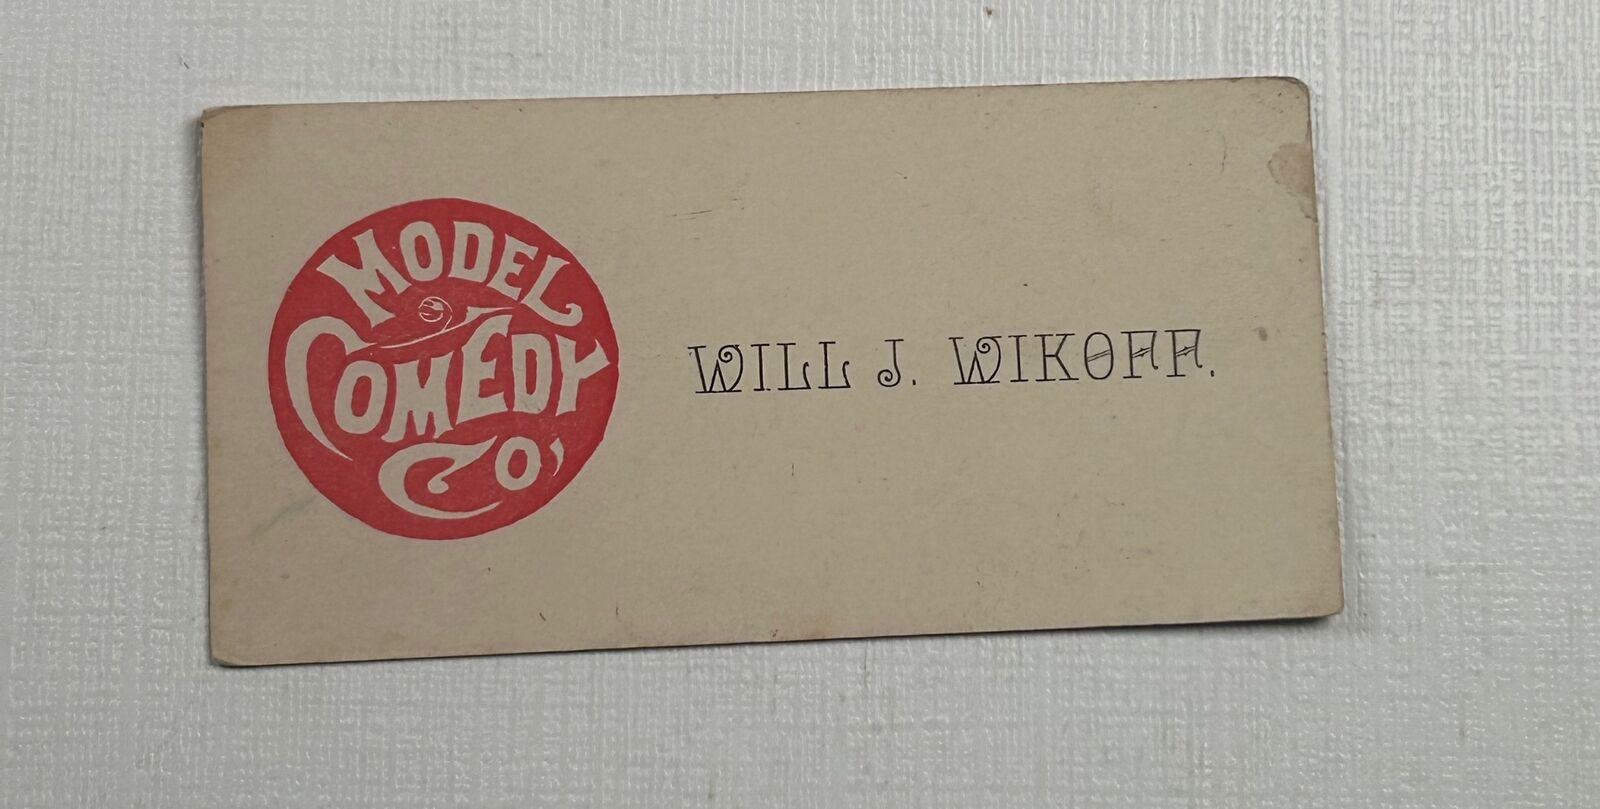 Vintage Business Card Will J Wikoff Model Comedy Co 